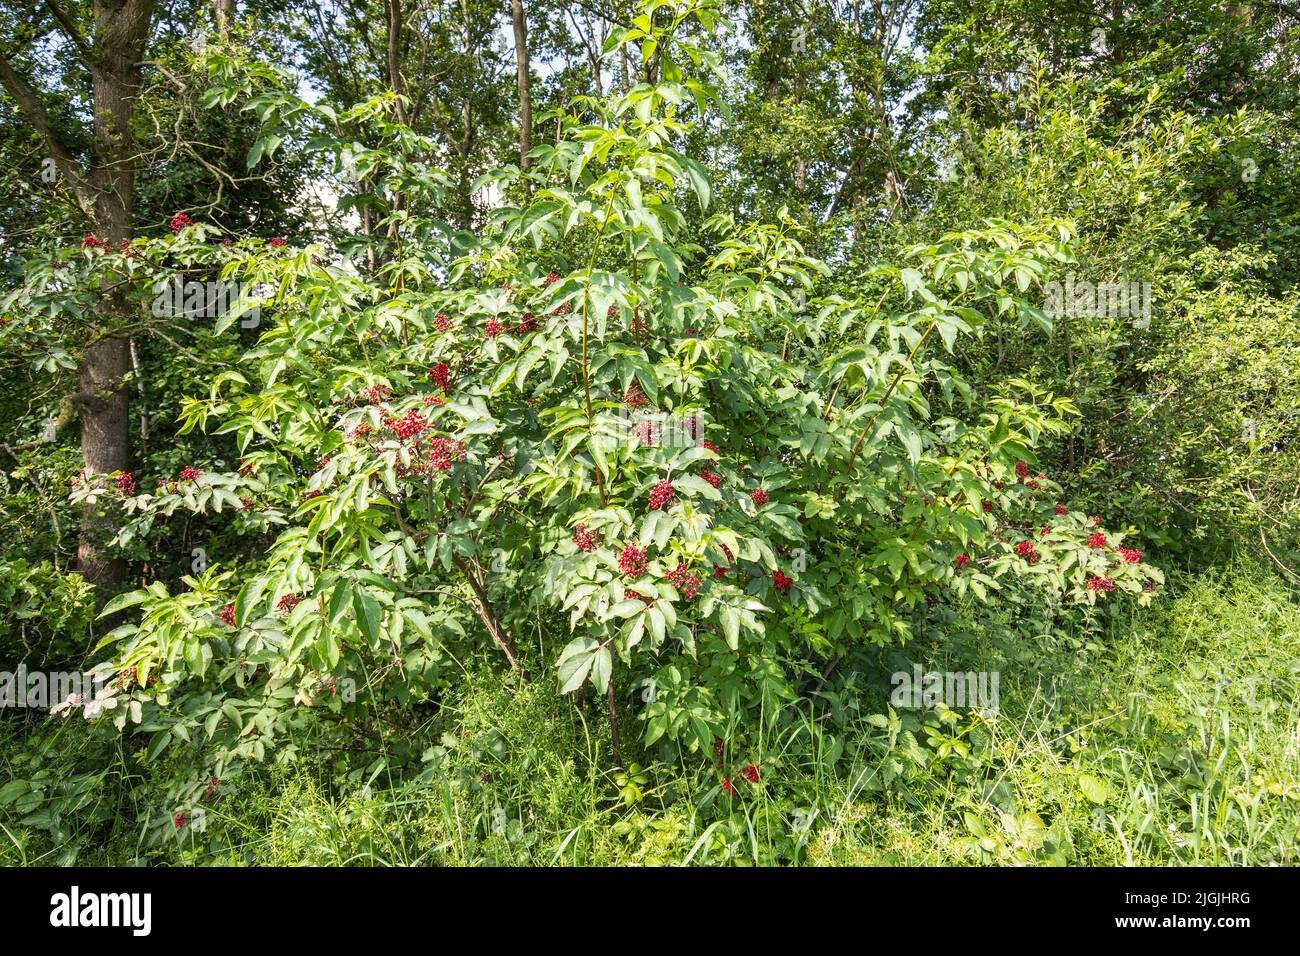 Close up of a Red-berried Elder, Sambucus racemosa, standing in forest edge with fresh green compound leaves and clusters of bright red colored berrie Stock Photo